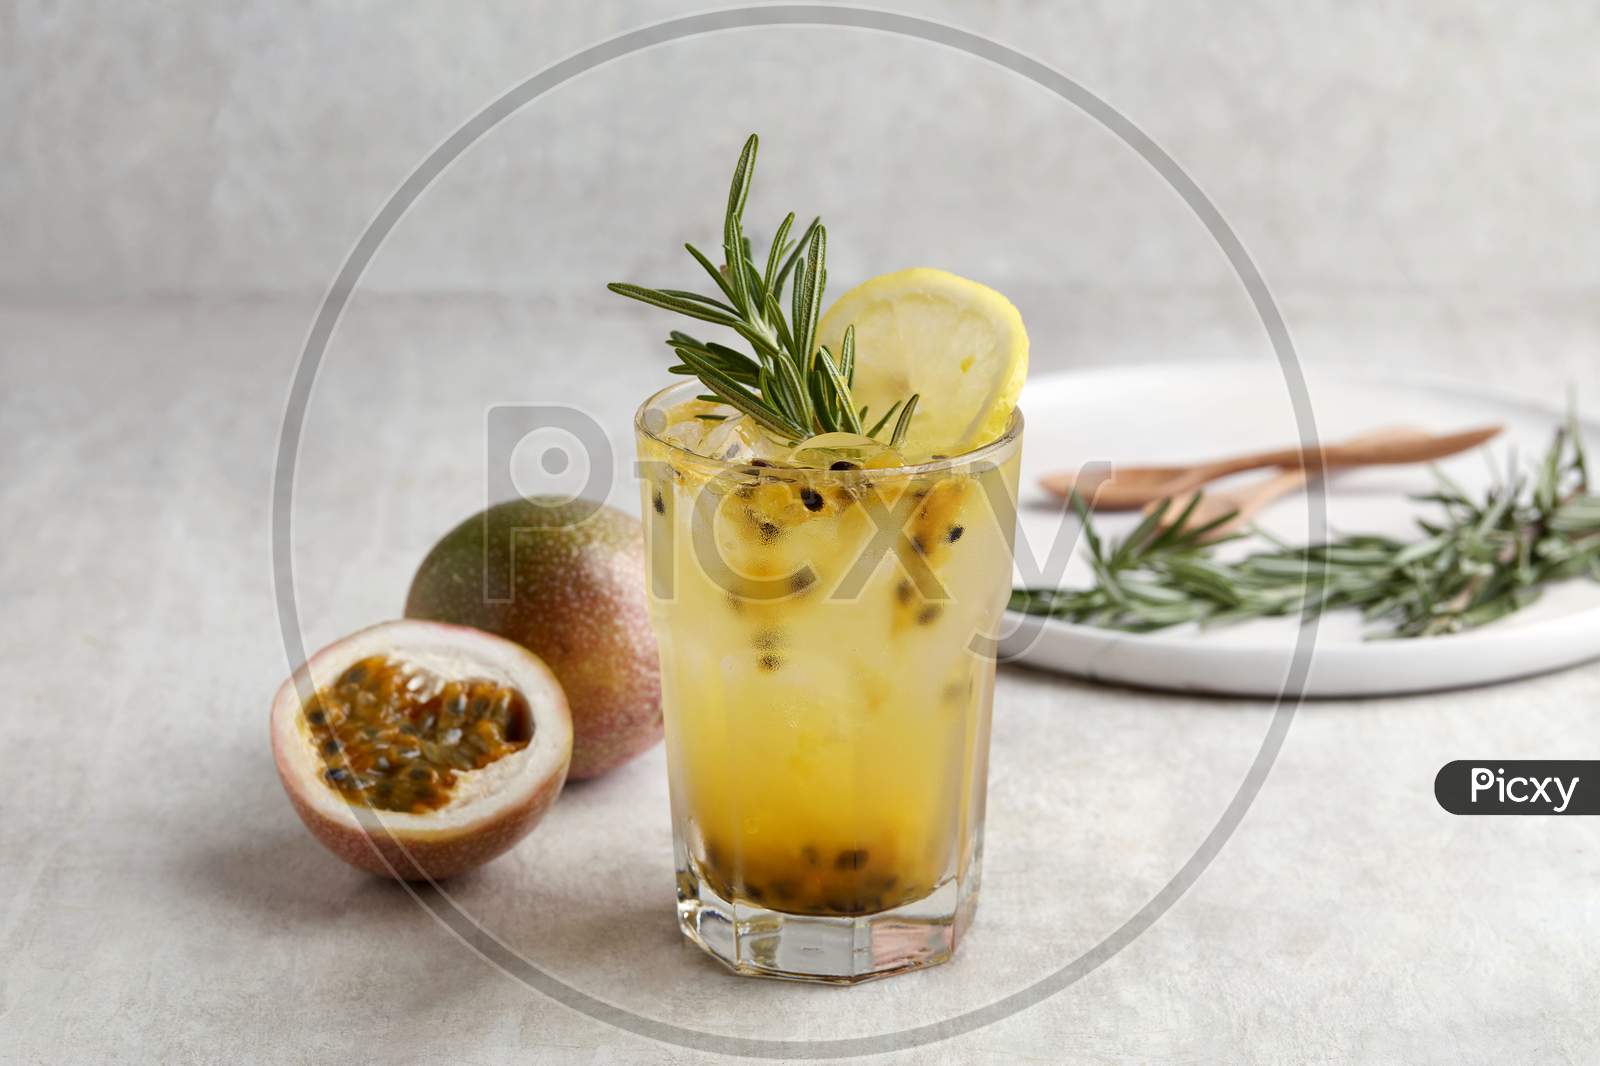 A Glass Of Iced Passion Fruit Soda With Lemon And Passion Fruit Half Slice On Grey Background, A Healthy Summer Drink